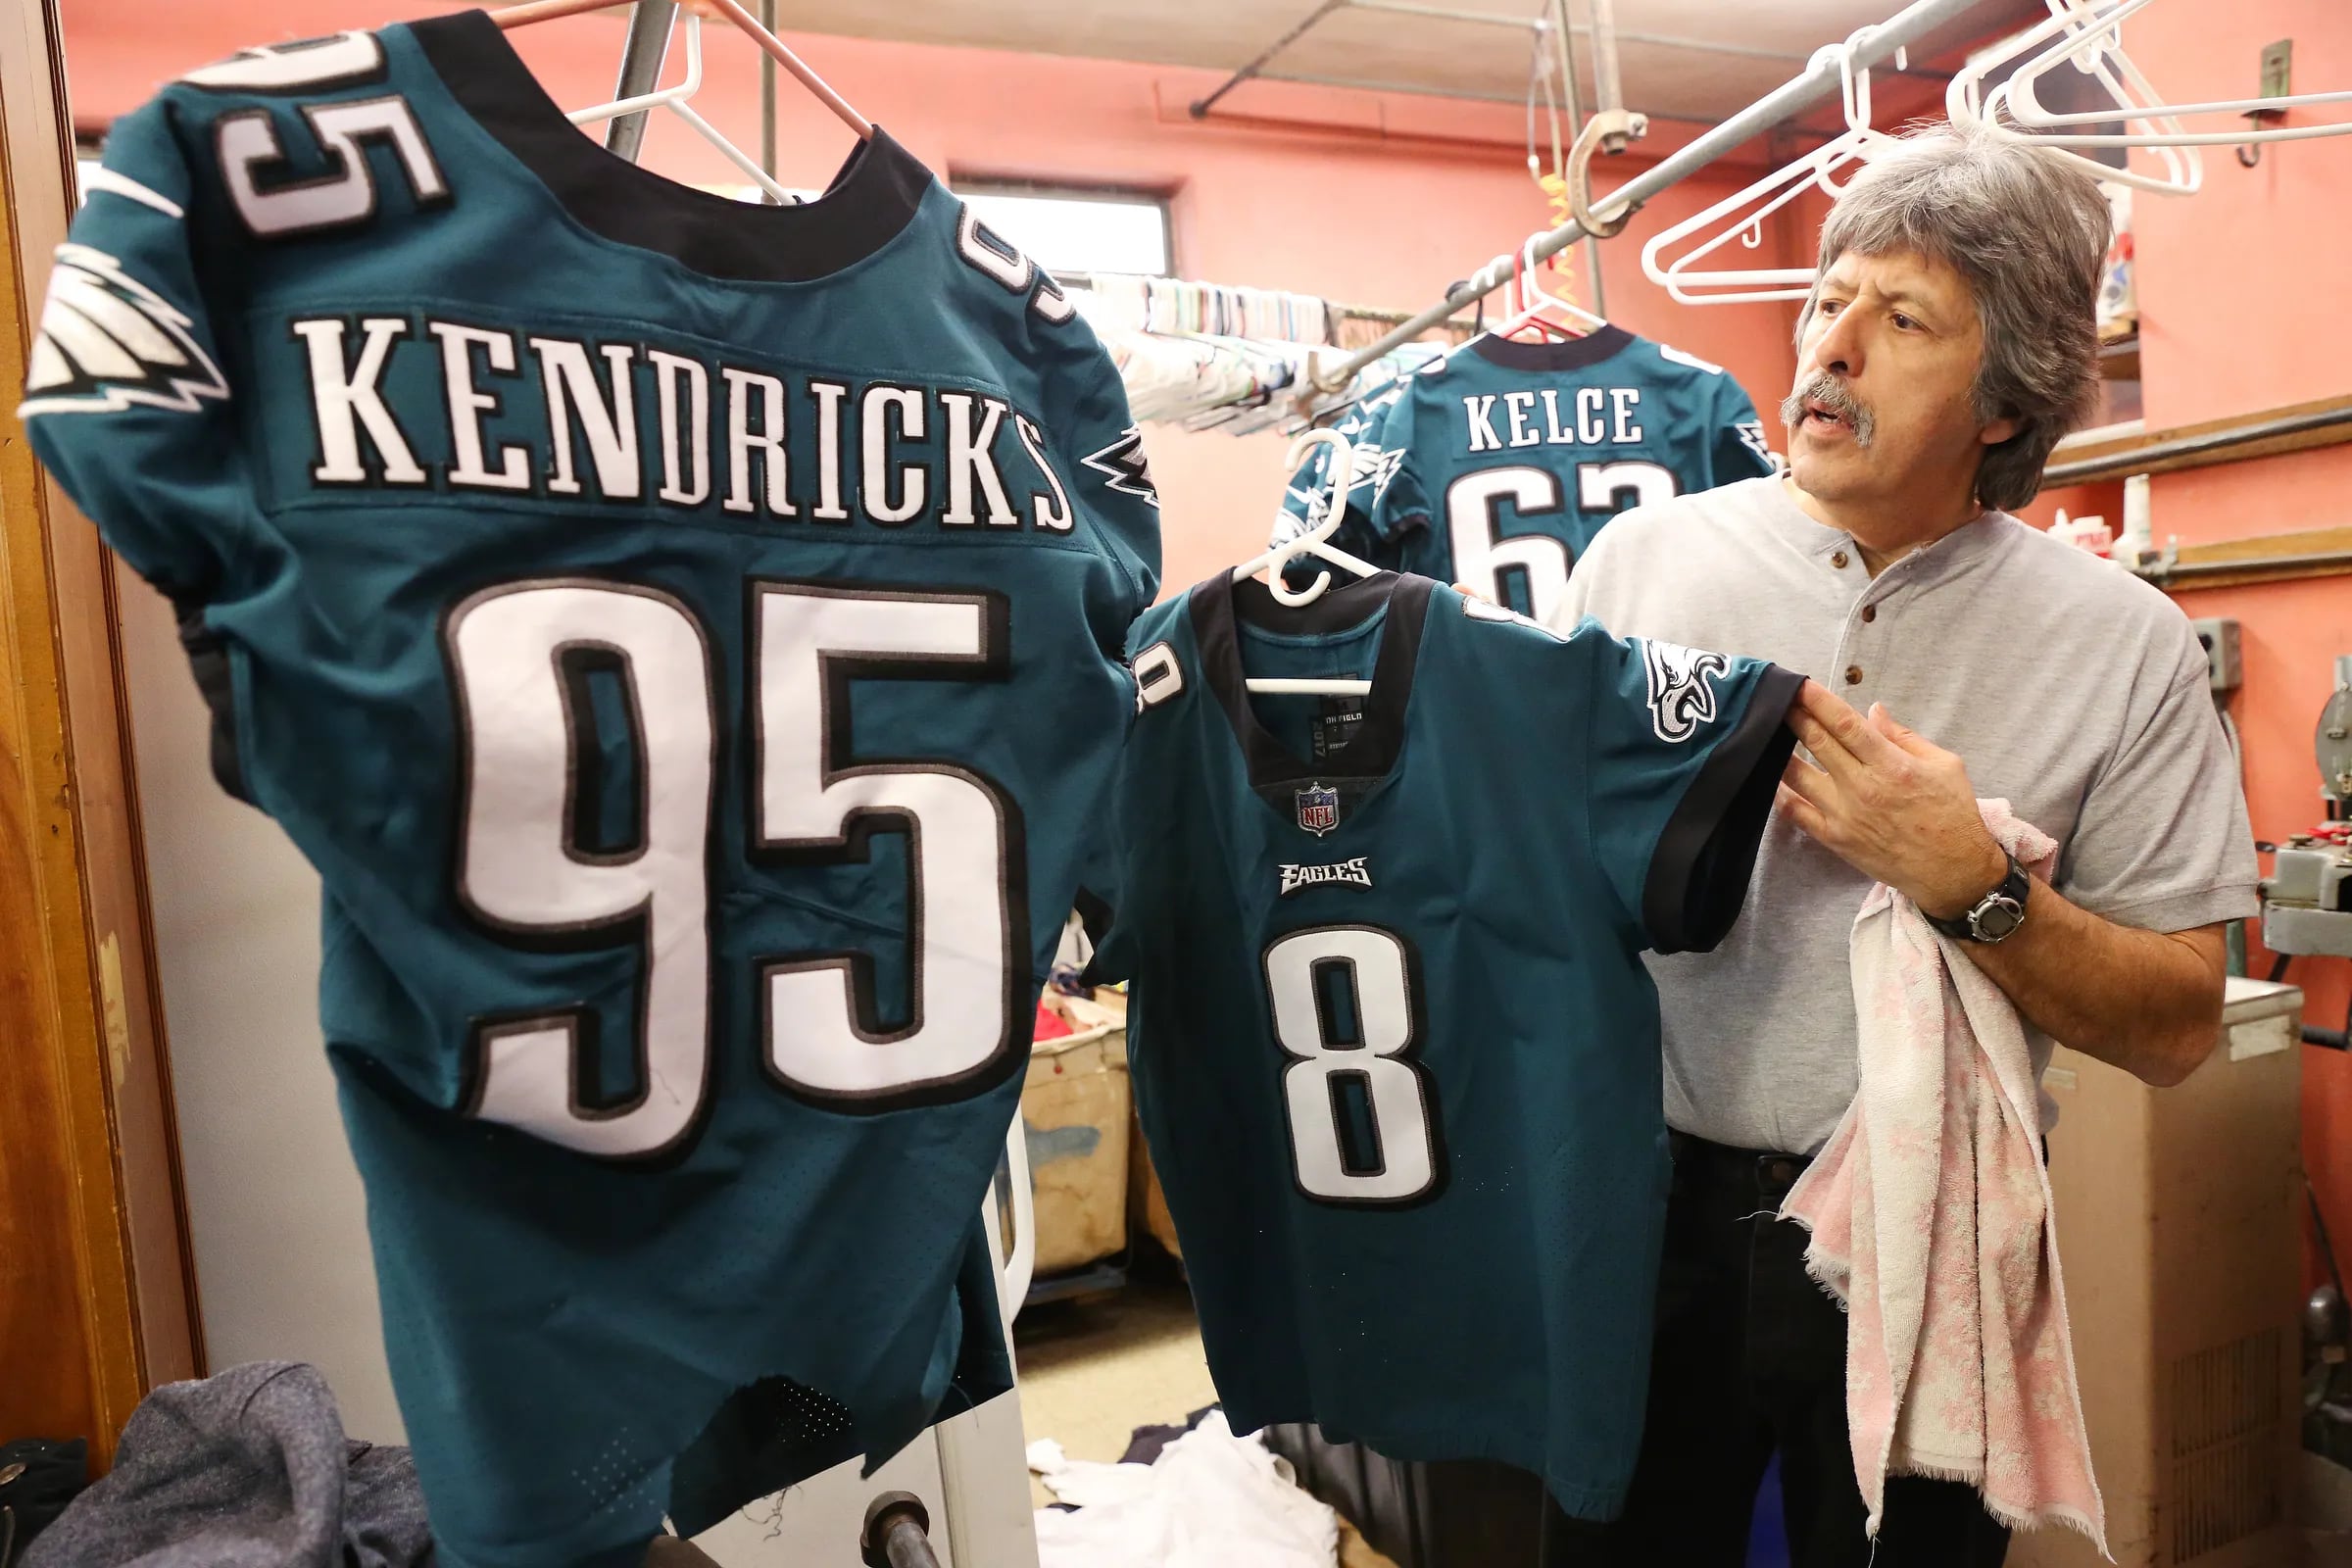 South Philadelphia cleaners responsible for keeping team's jerseys game day  ready - WHYY